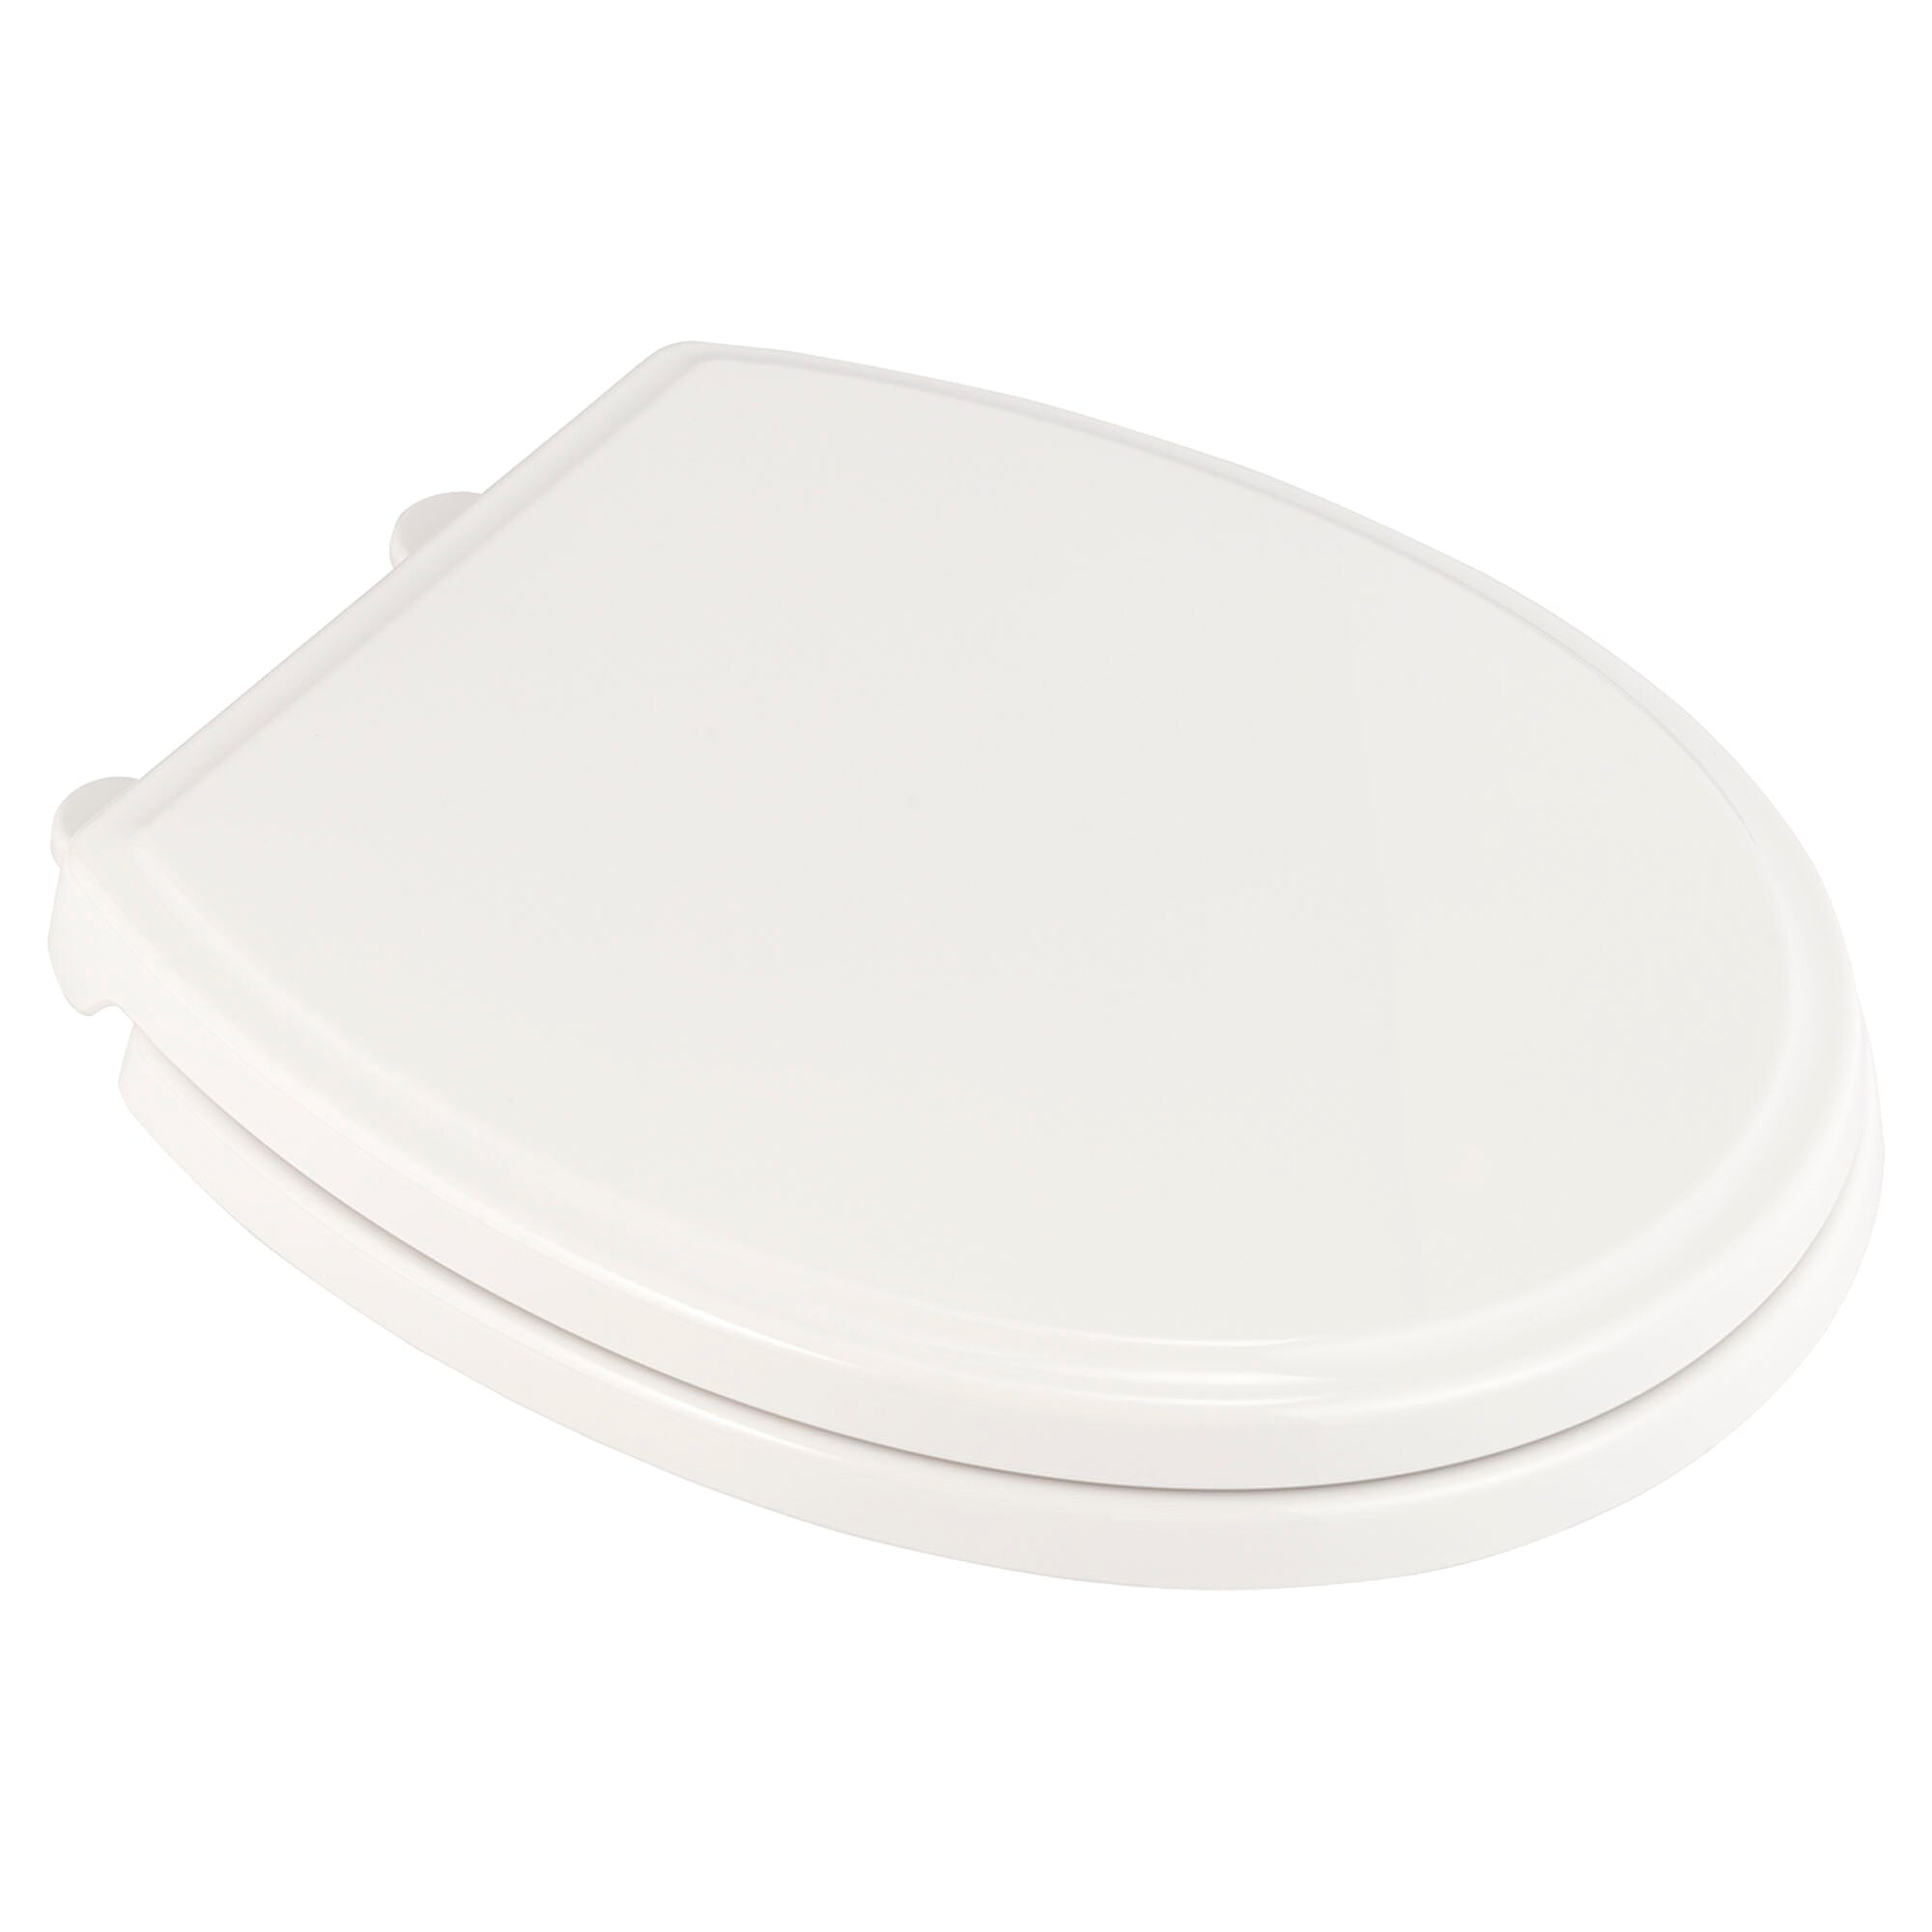 American Standard TRADITIONAL White Round Slow-Close Toilet Seat